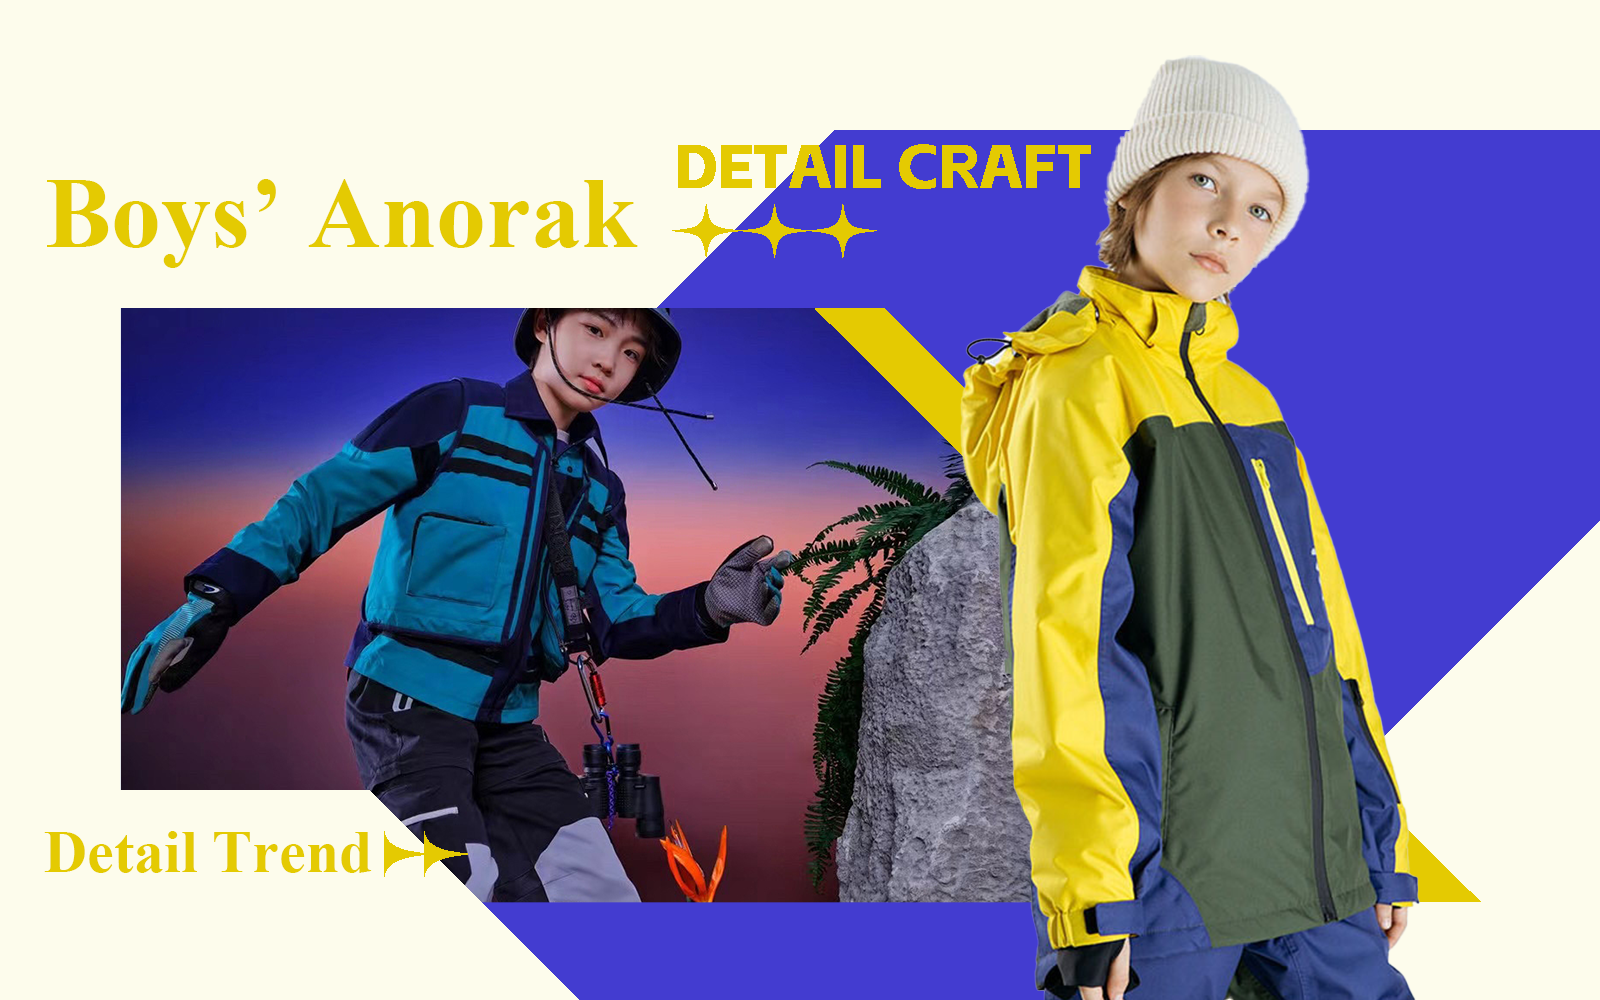 The Detail & Craft Trend for Boys' Anorak